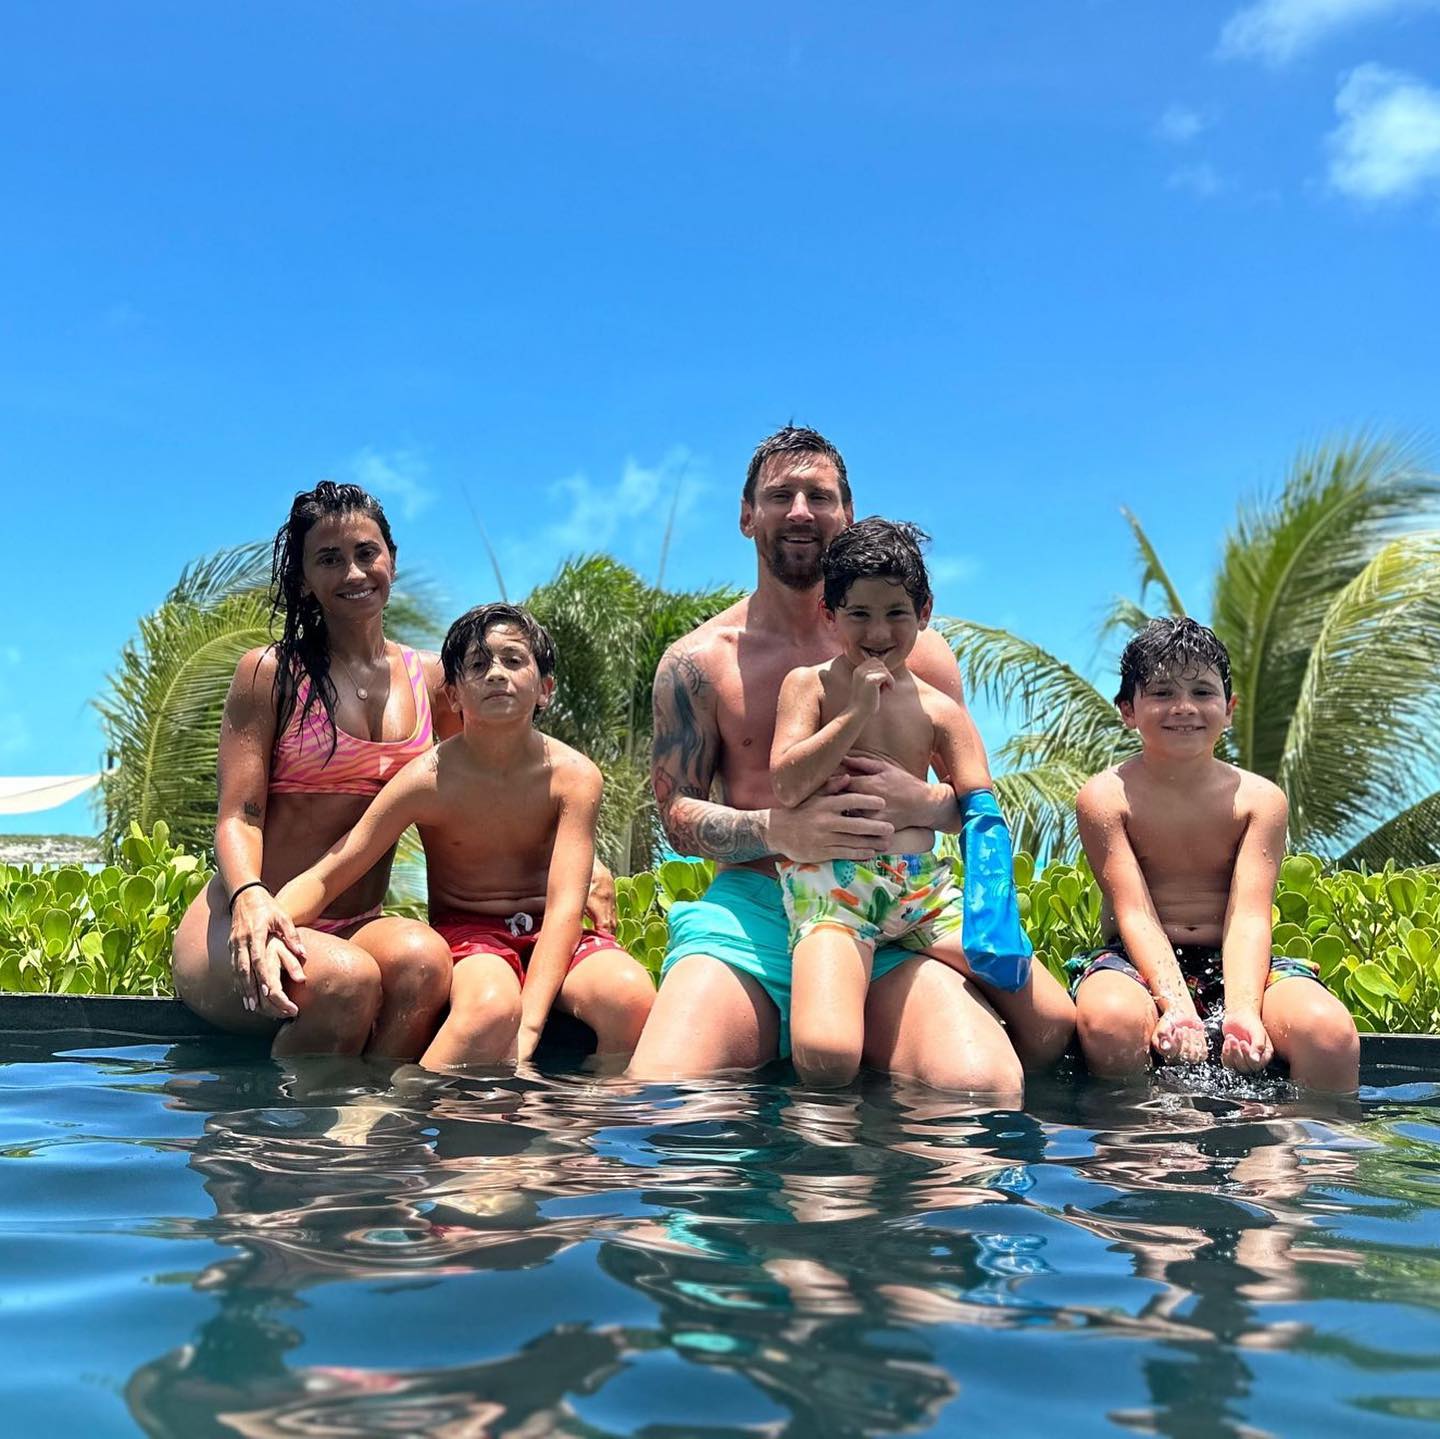 Lionel Messi's Heartwarming Miami Moment: Family Poolside Fun with All Three Kids - Check Out the Adorable Family Photo